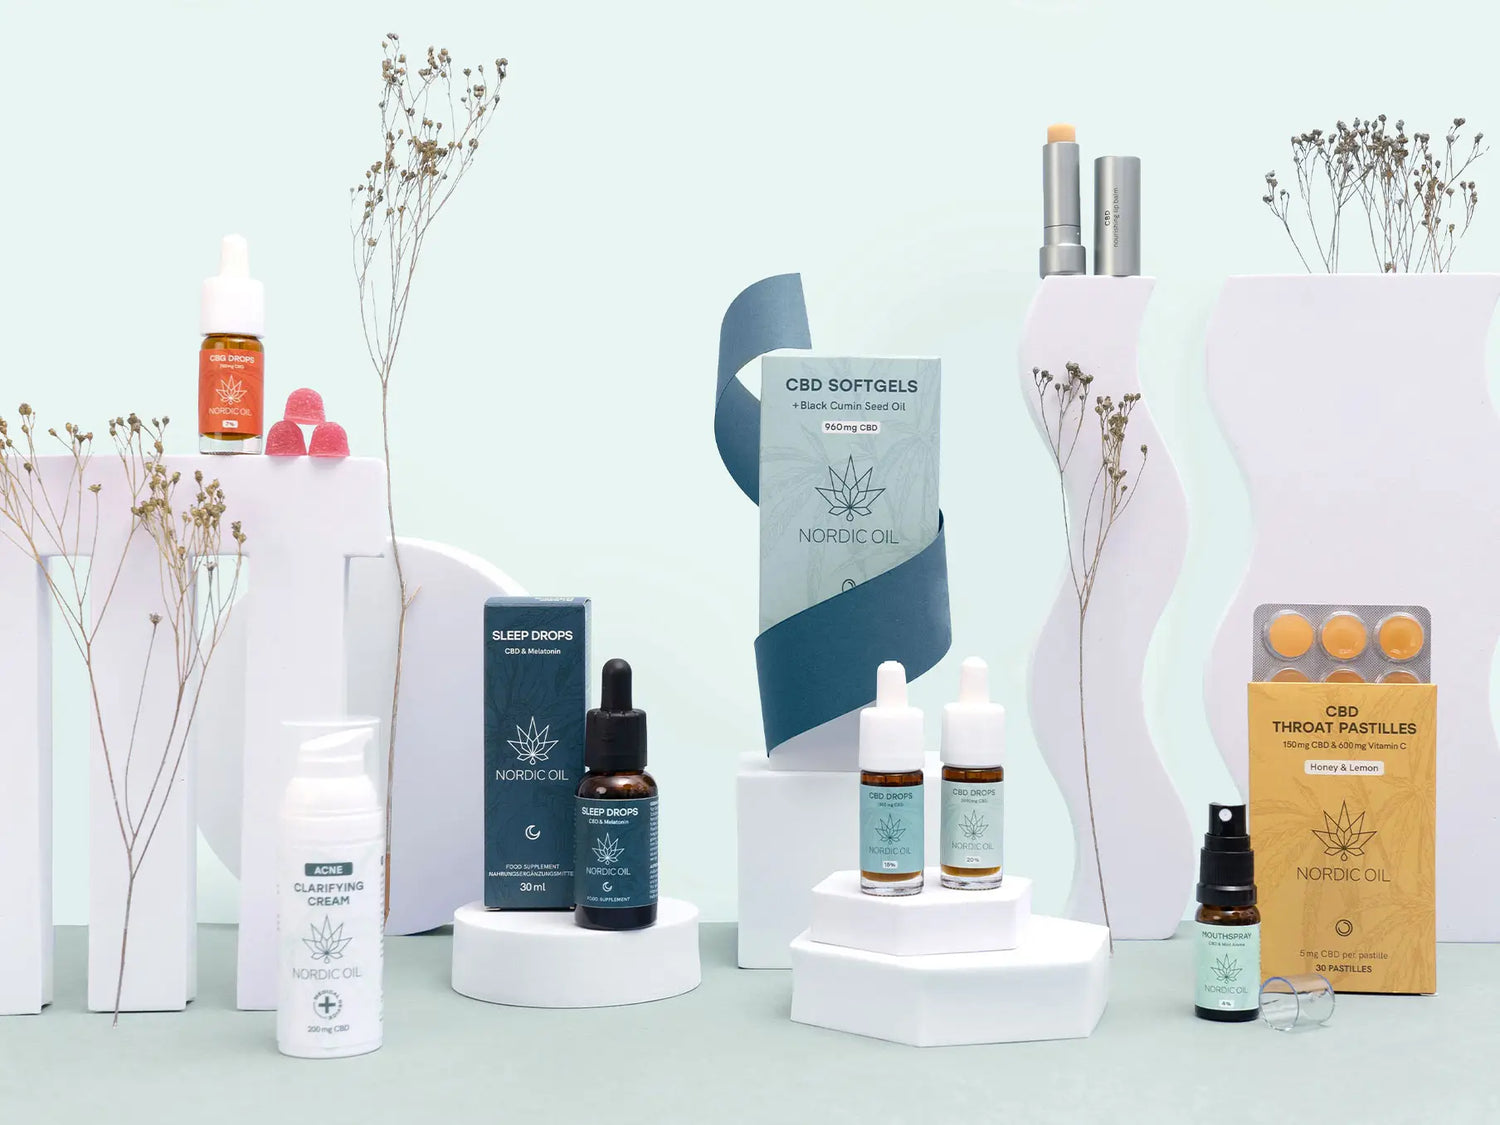 multiple cbd products presented together on ablue background